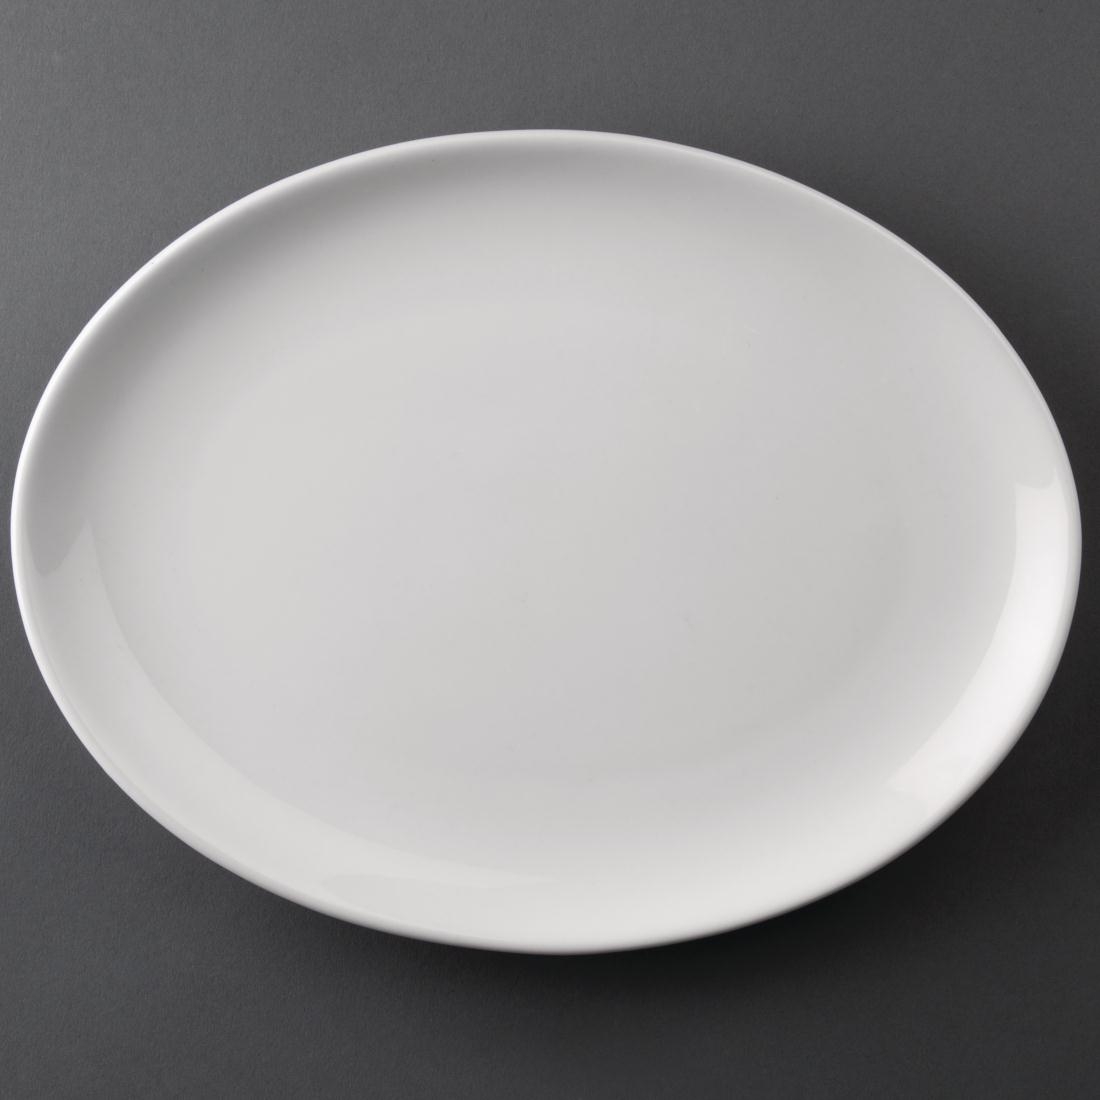 Athena Hotelware Oval Coupe Plates 254 x 197 mm